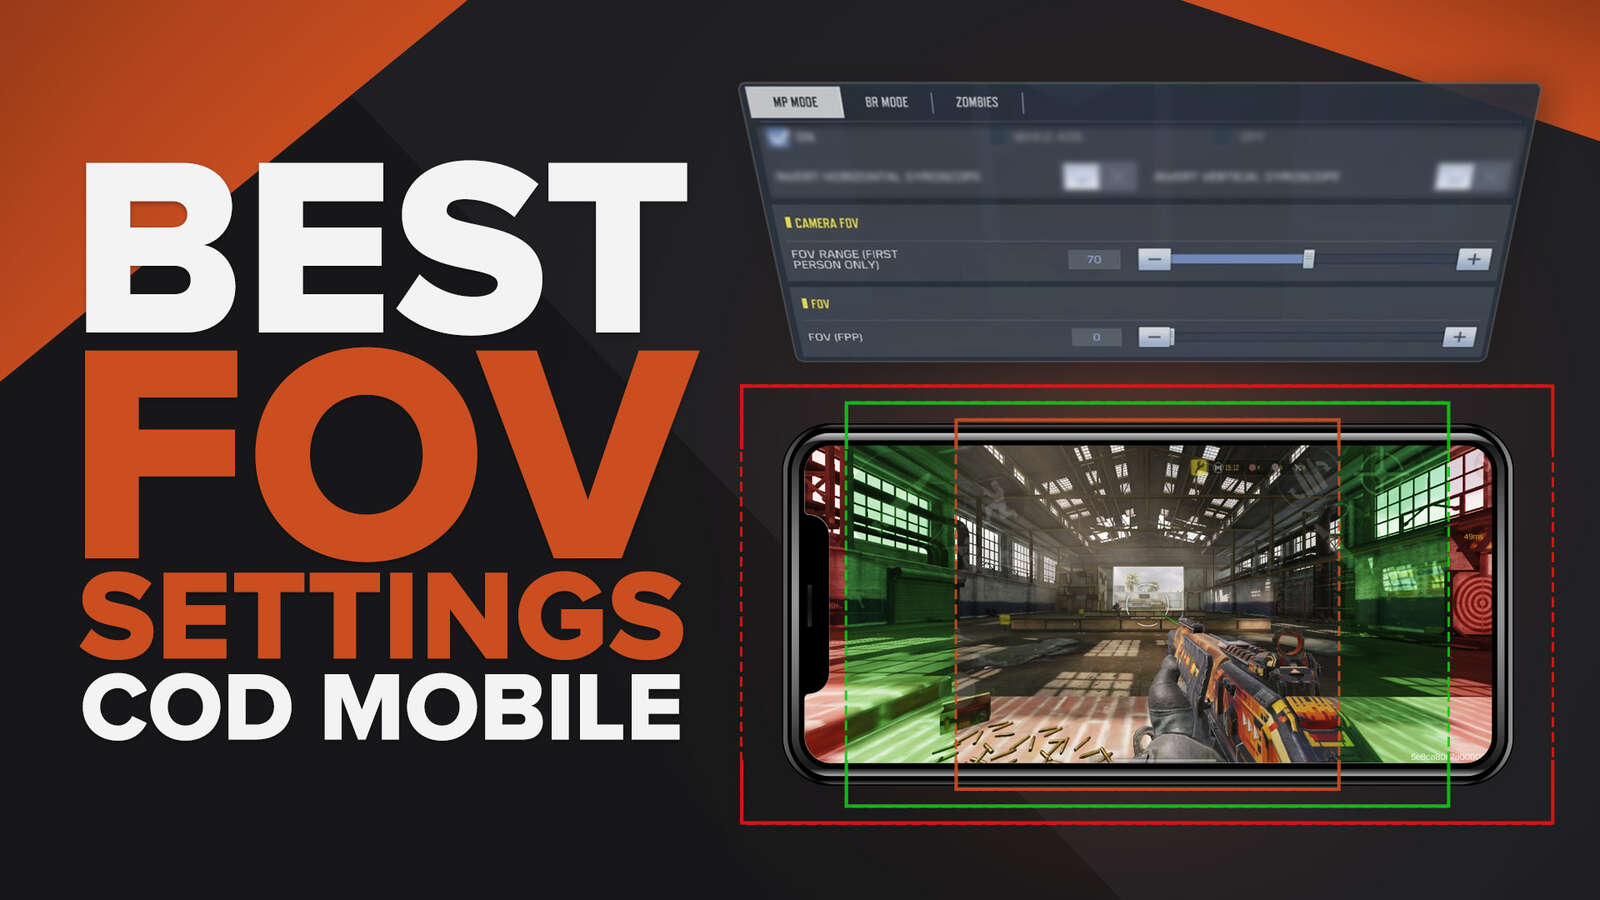 3 Best FOV Settings to Use in Call of Duty Mobile